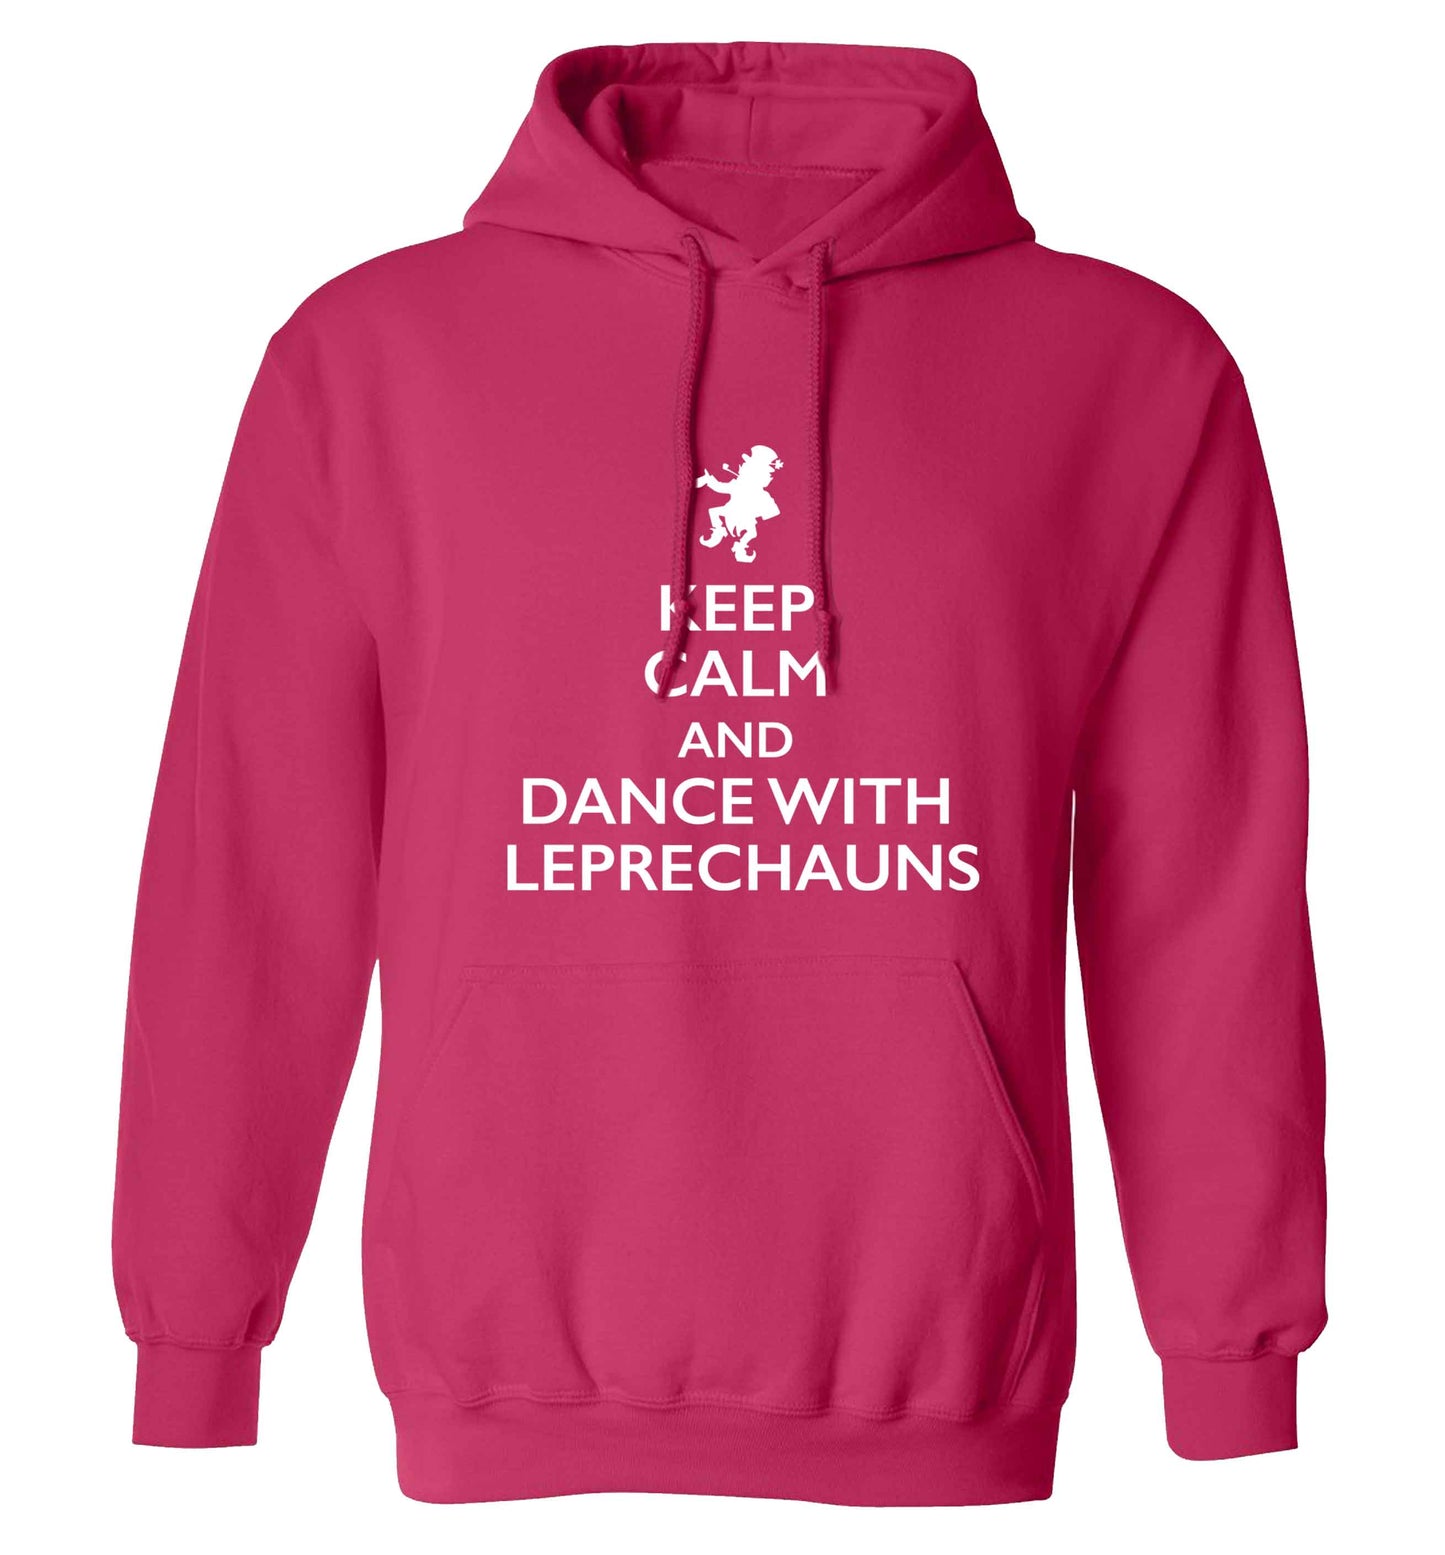 Keep calm and dance with leprechauns adults unisex pink hoodie 2XL